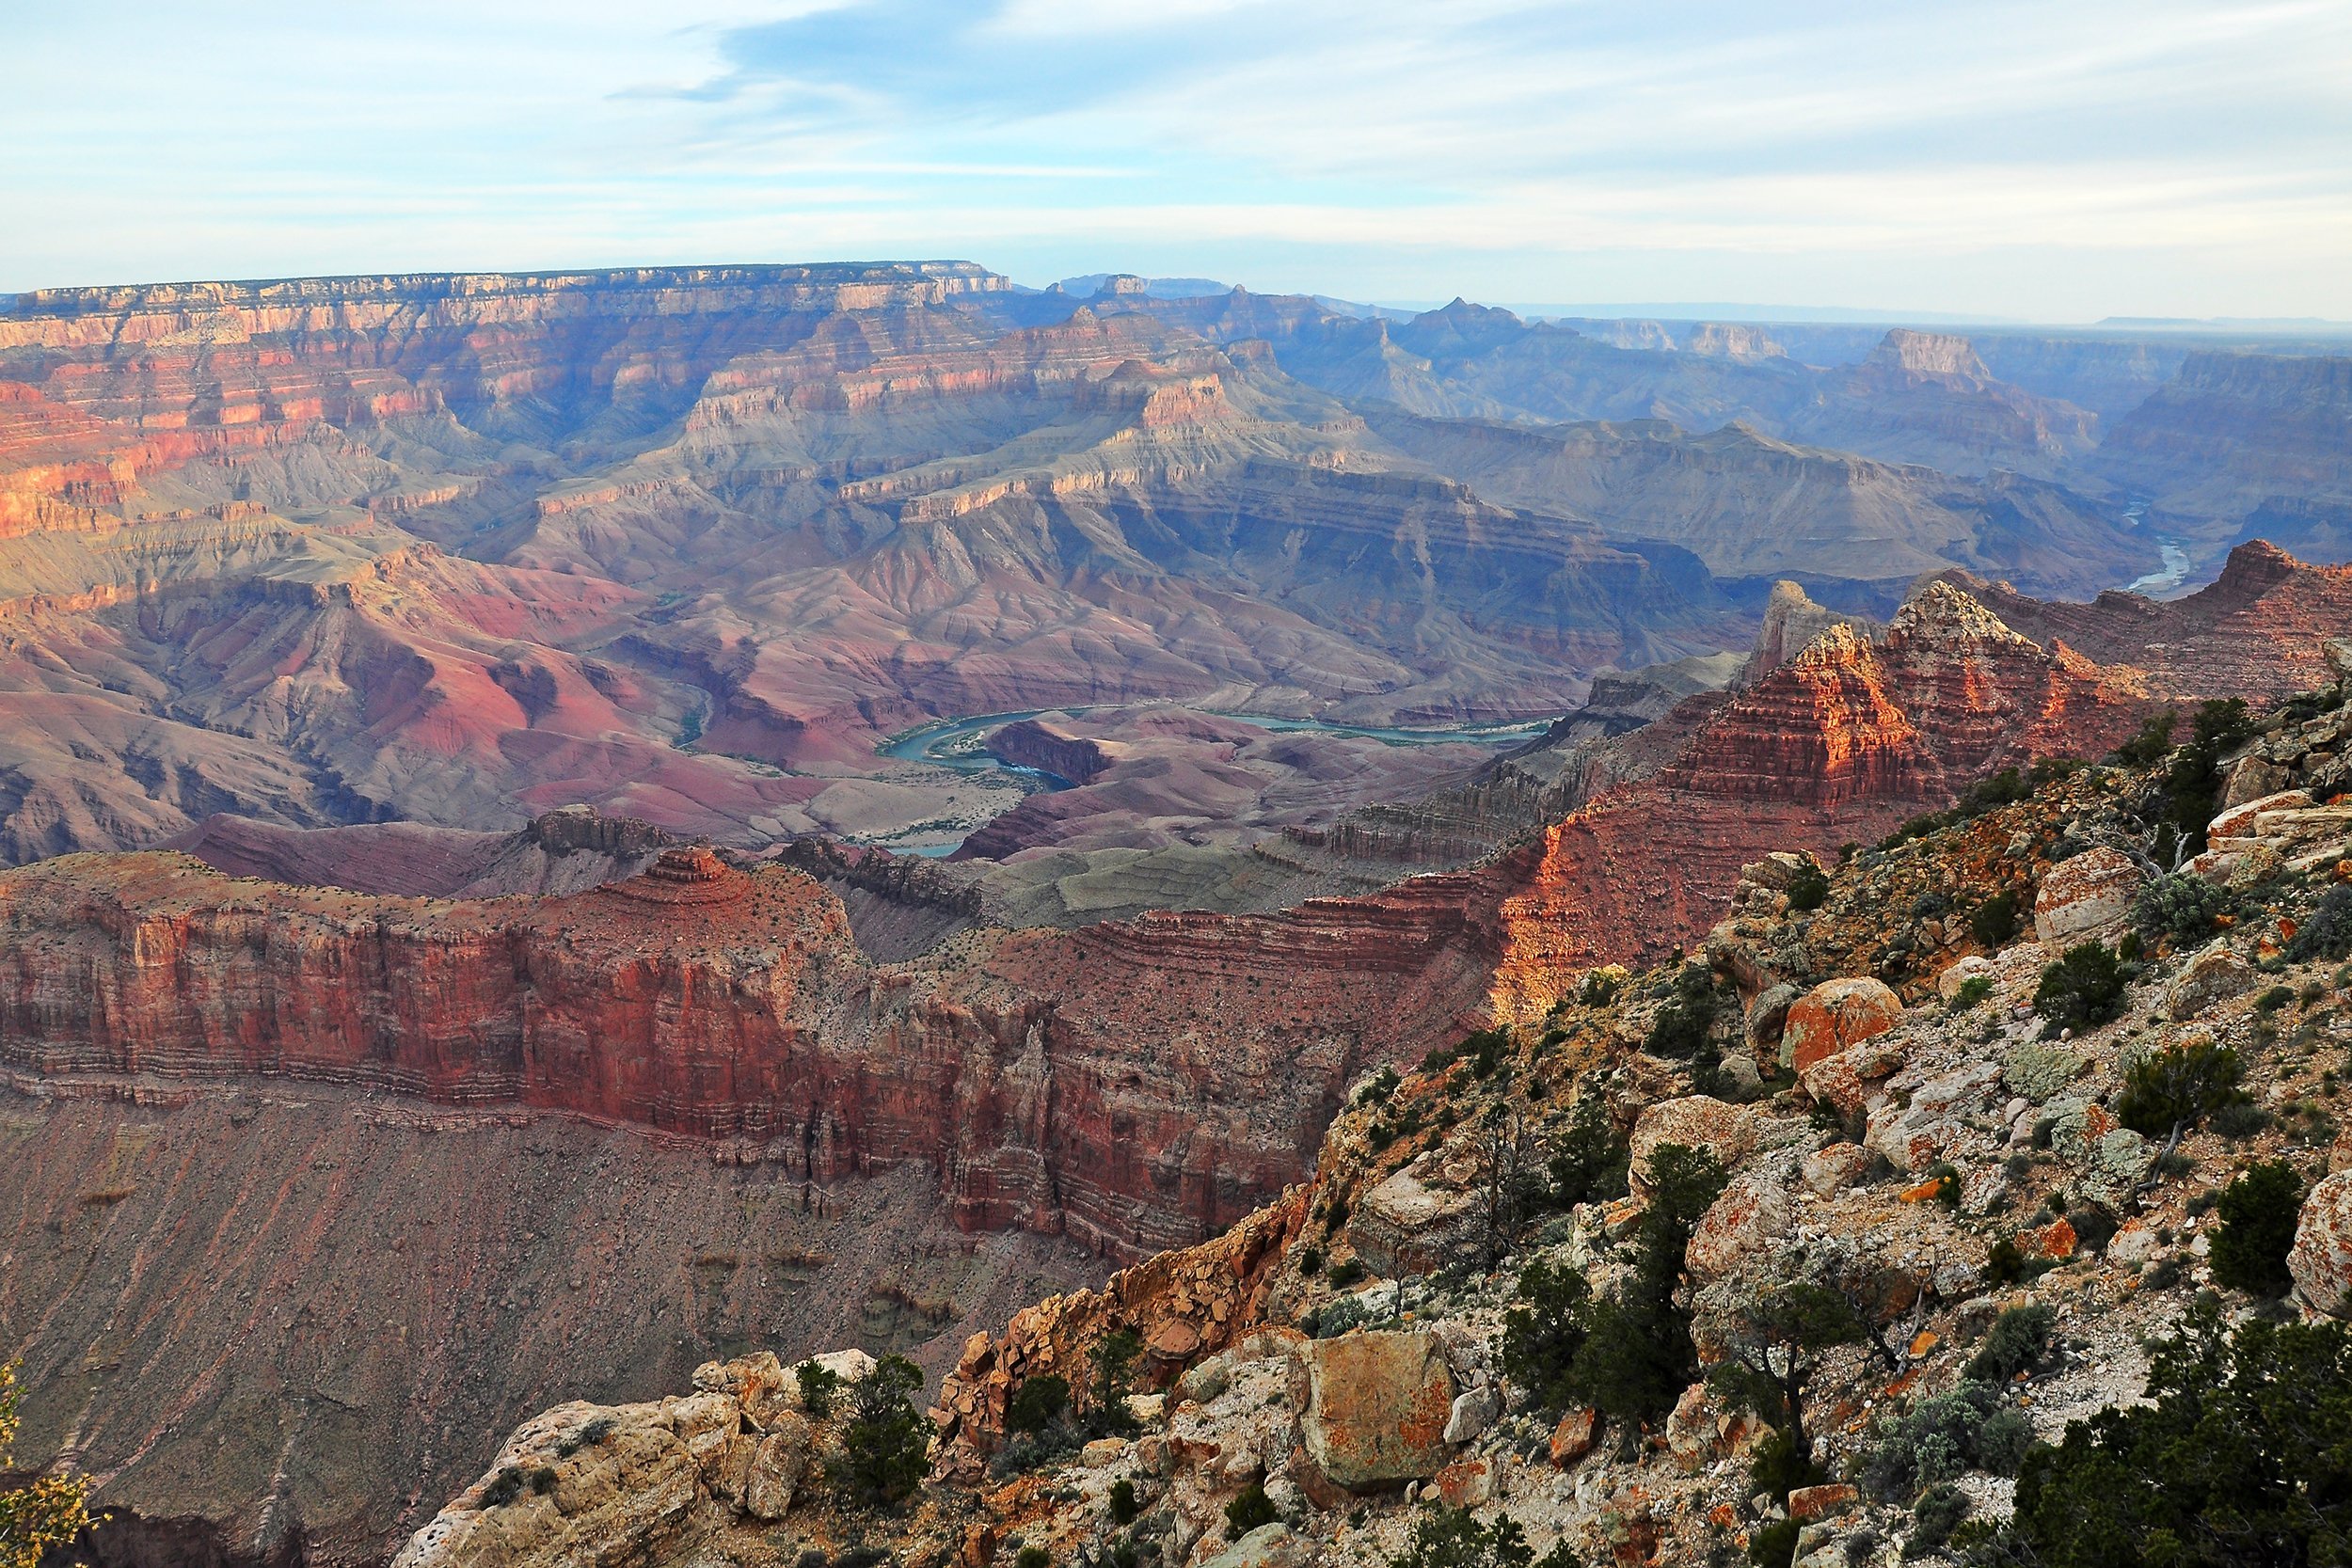 <p>Arizona is home to three national parks, each worth a visit, but the <a href="https://www.nps.gov/grca/index.htm">Grand Canyon</a> is the one that tops <a href="https://blog.cheapism.com/bucket-list-vacations-15515/">most bucket lists</a>. Summer is a popular time, even though temperatures may exceed 100 degrees on the West Rim and canyon floor. Quick but intense thunderstorms are also possible, offering a brief respite from the heat while adding beauty to an already stunning landscape. </p><p><i>Upgrade your national park adventure and camp in comfort. Consider an <a href="https://www.tkqlhce.com/click-3559491-13414687?sid=msnshop14142-ns&url=https%3A%2F%2Frvshare.com%2F%3F">RV rental from RVshare</a>, if you don't already own a rig of your own.</i></p><p><b>Related:</b> <a href="https://blog.cheapism.com/national-park-experiences/">Bucket-List Experiences in America's National Parks</a></p>